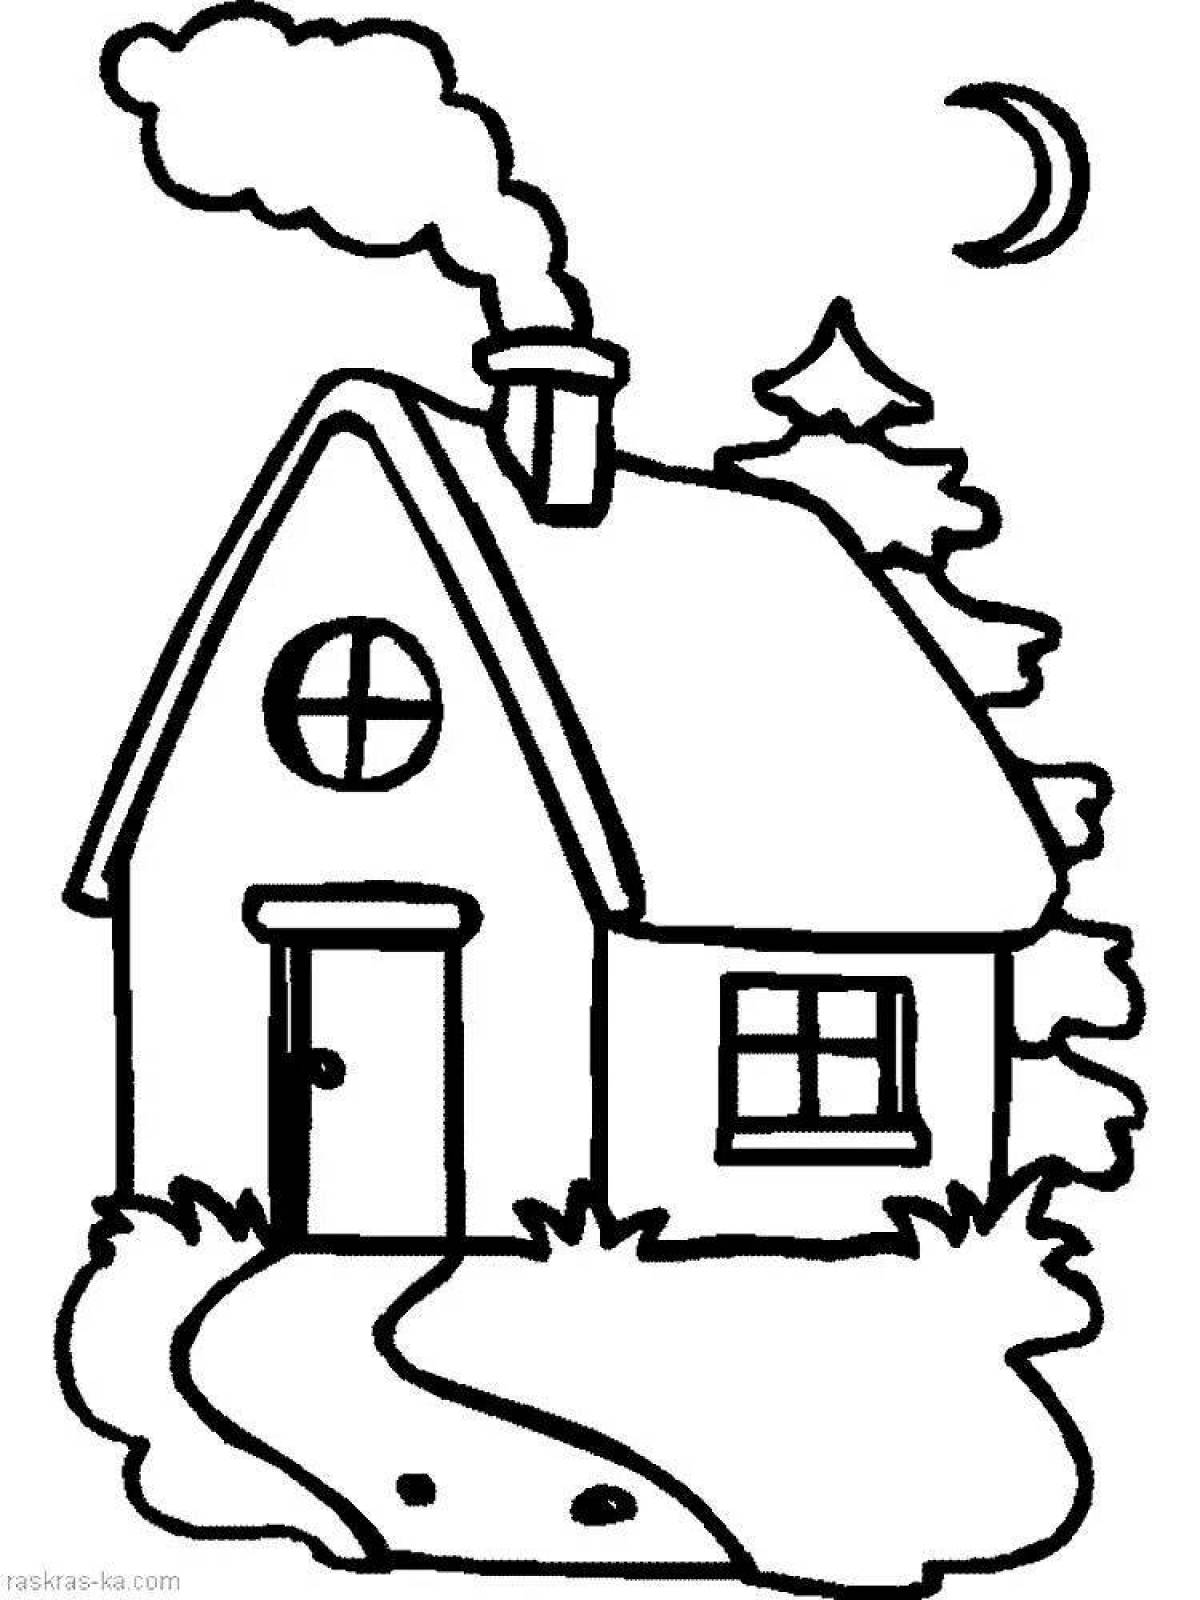 Coloring page cheerful village house for children